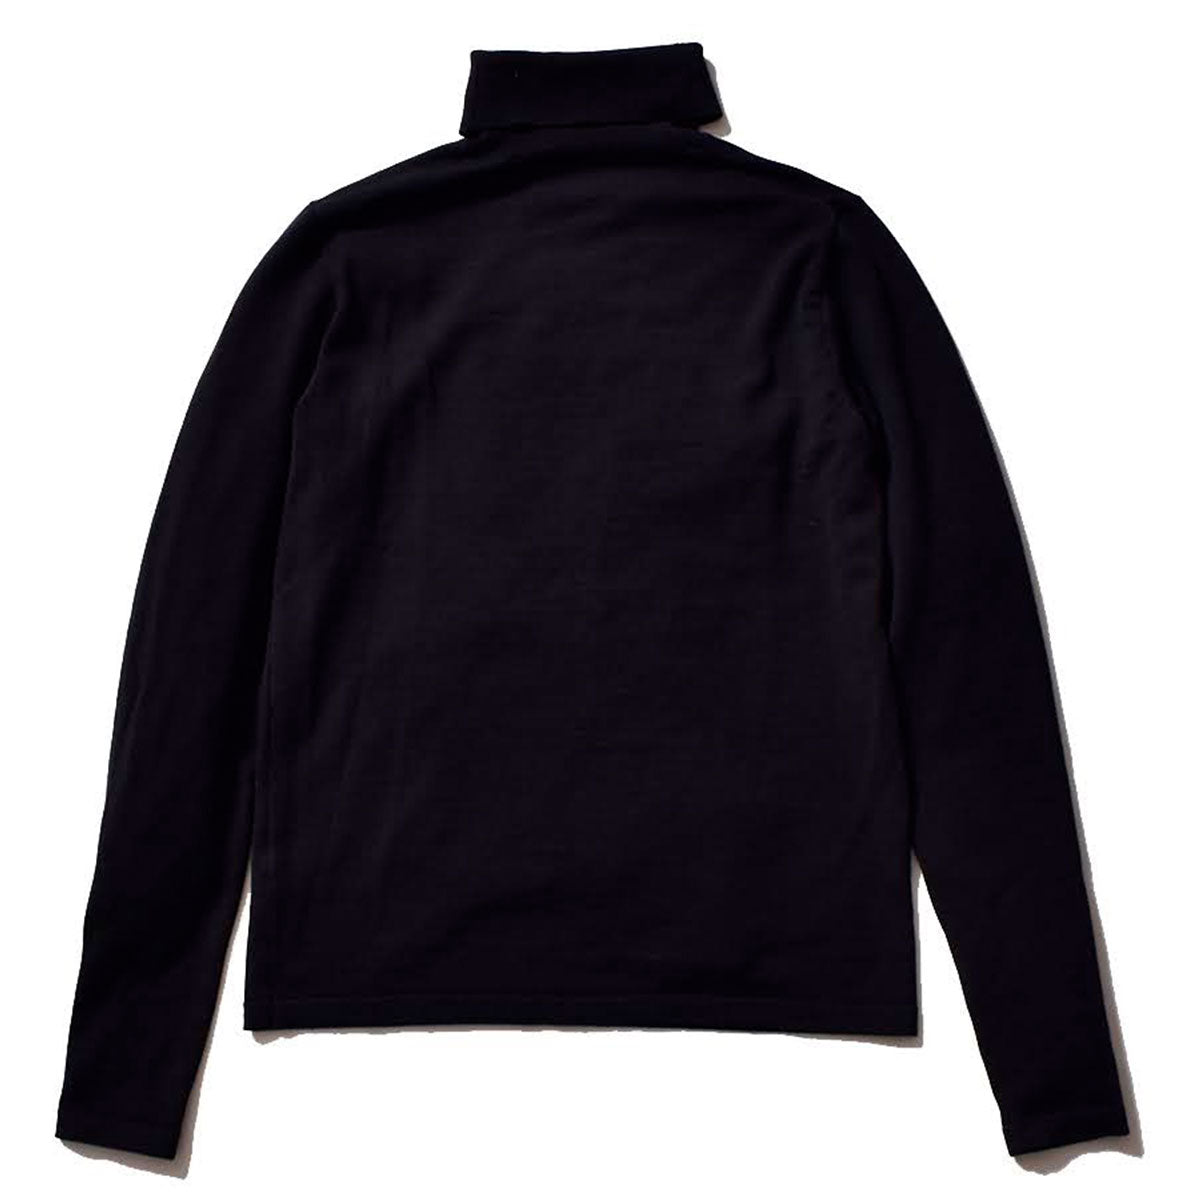 EF.Wool Knit Turtle neck Pullover - Why are you here?